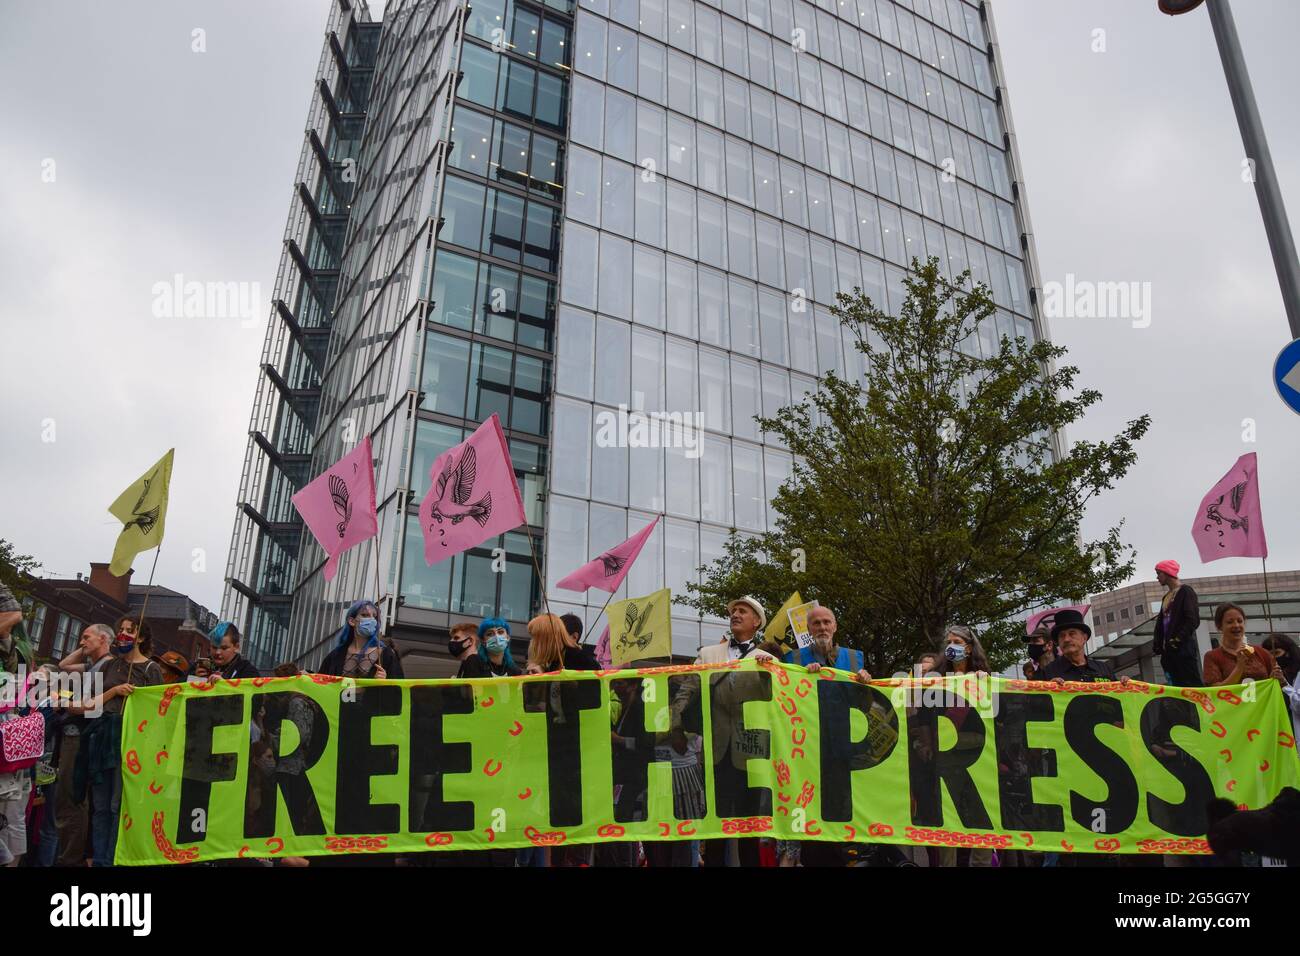 London, United Kingdom. 27th June 2021. Demonstrators outside News UK during the Free The Press protest. Extinction Rebellion demonstrators marched from Parliament Square to News UK headquarters, owned by Rupert Murdoch, in London Bridge, in protest of misinformation, corruption, and the inaccurate and insufficient coverage of the climate crisis by Murdoch's newspapers. (Credit: Vuk Valcic / Alamy Live News) Stock Photo